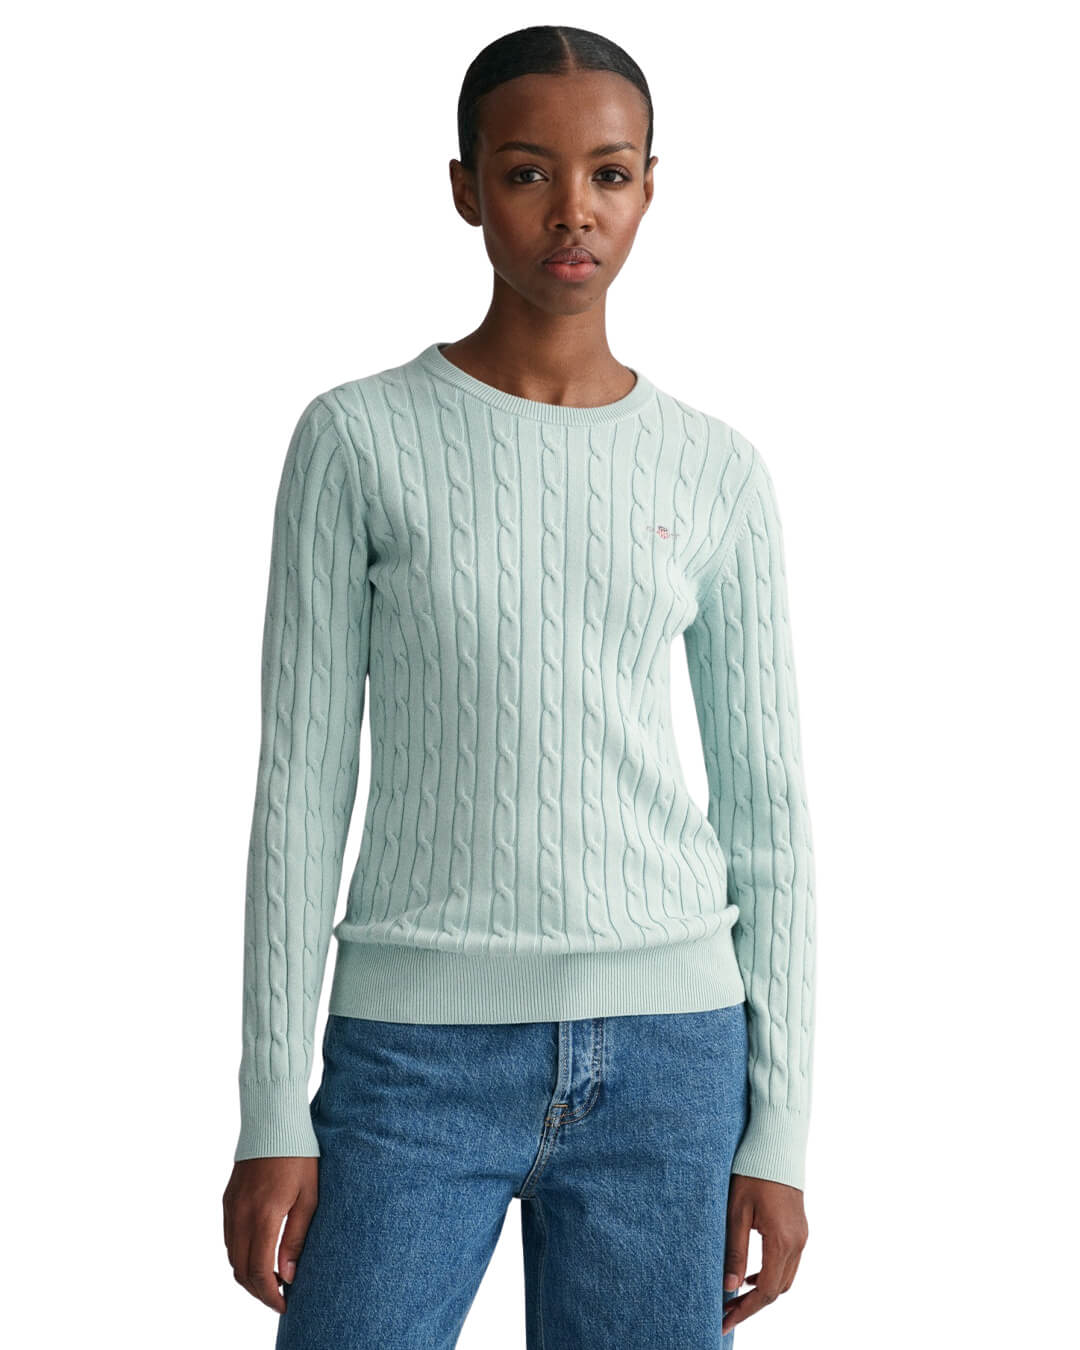 Gant Jumpers Gant Dusty Turquoise Stretch Cotton Cable Knit Crew Neck Sweater